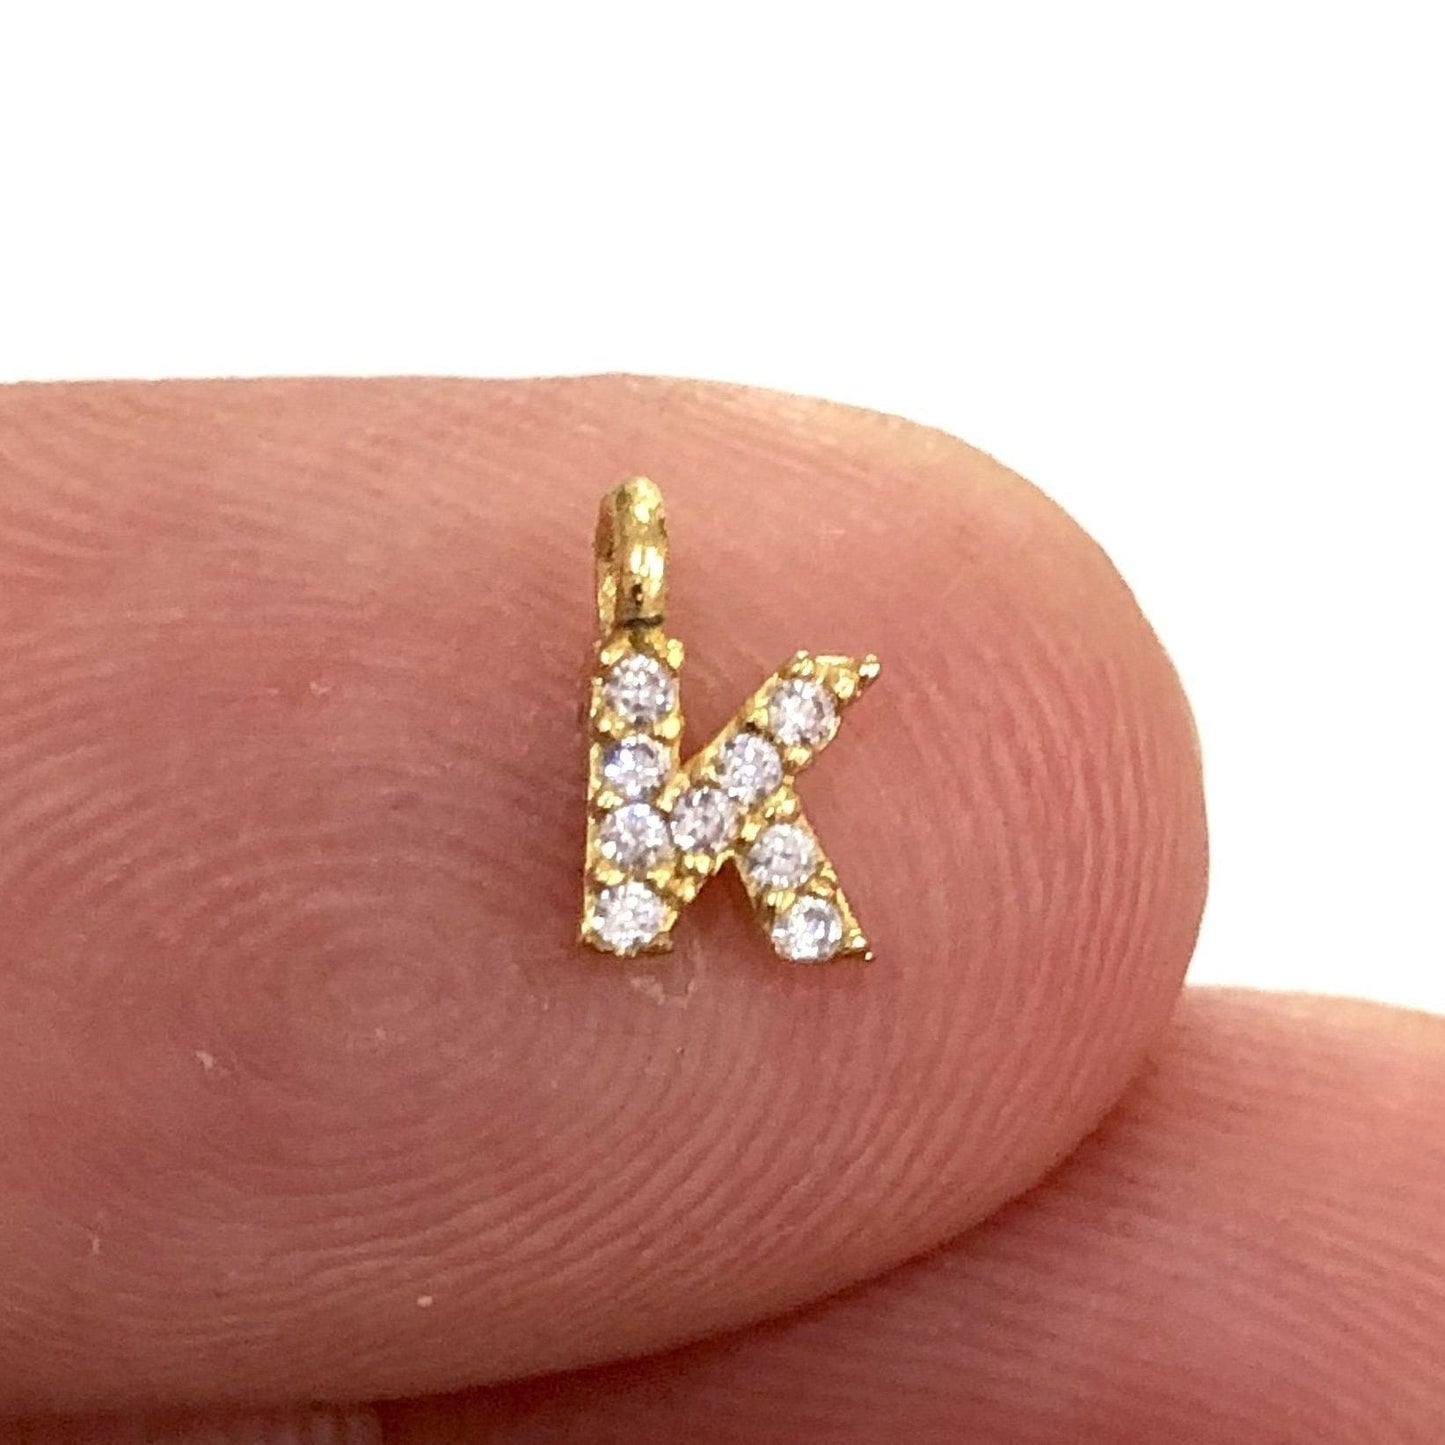 Gold Plated Zircon Stone Letter